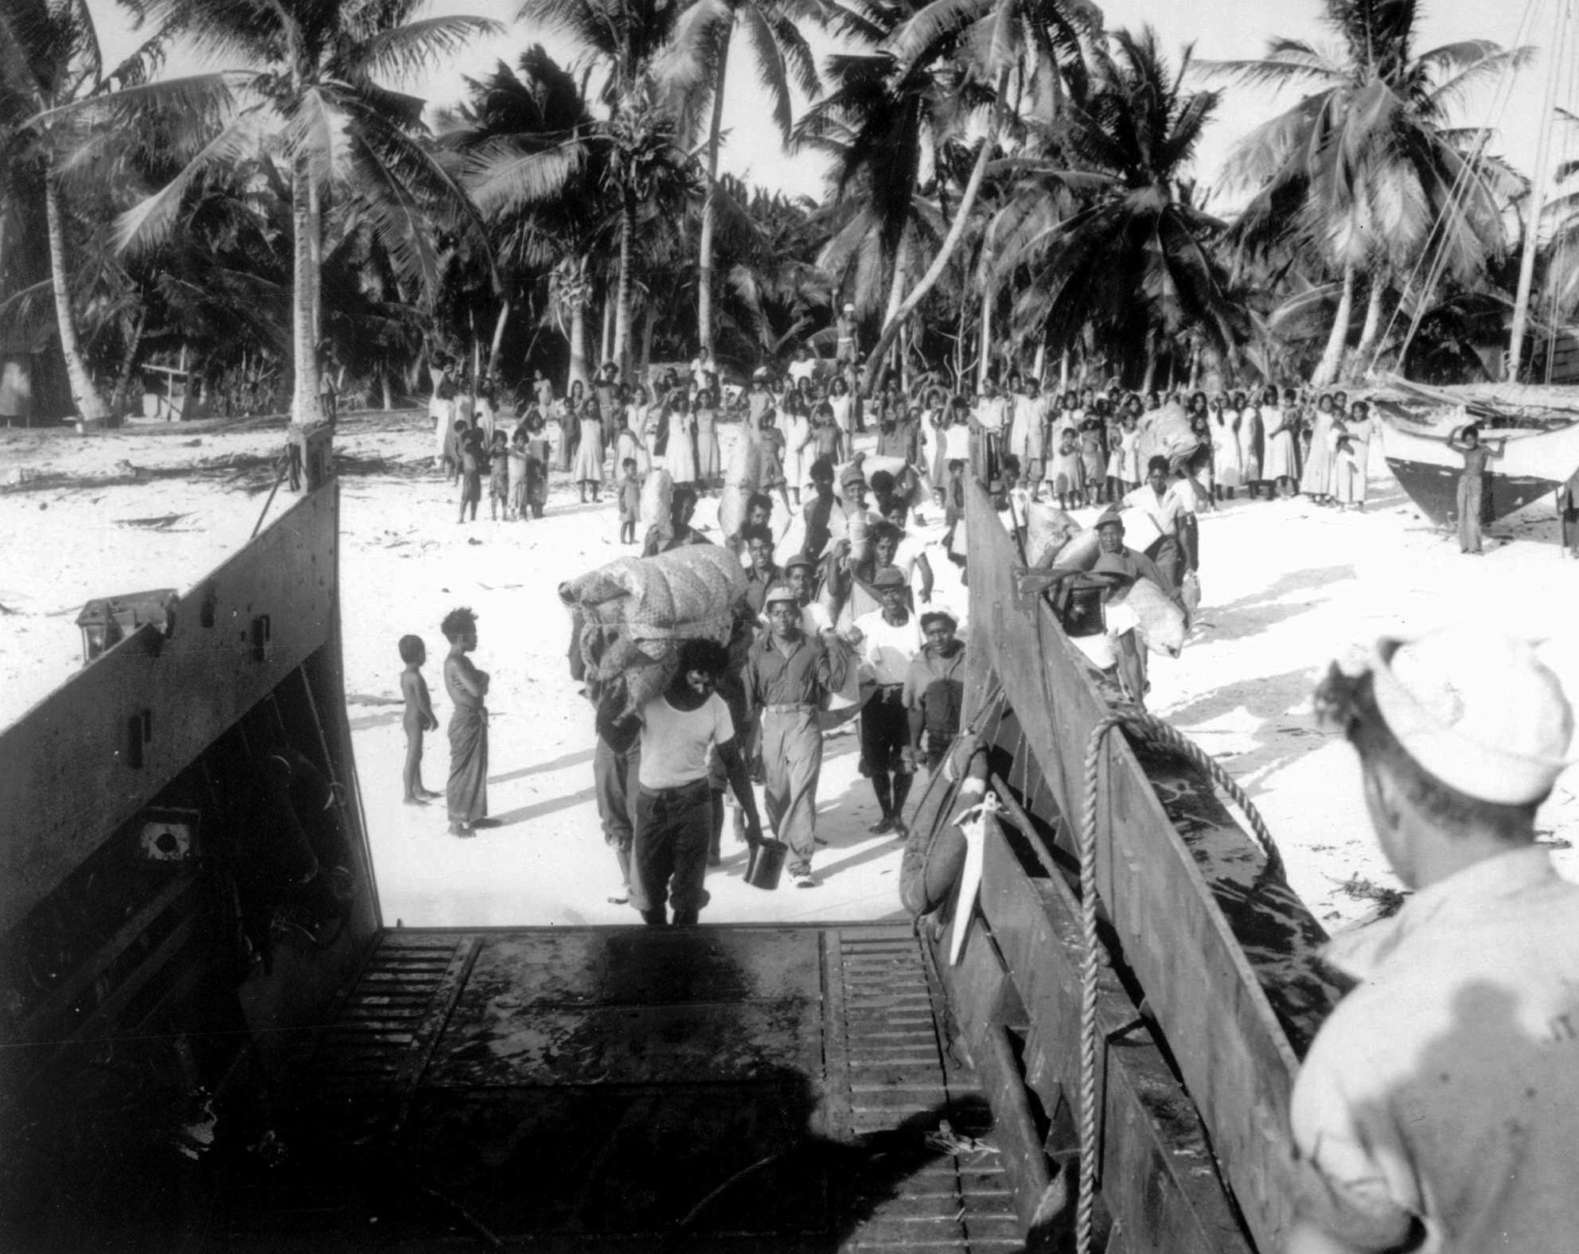 An advance team of Bikini men board a landing craft to assist U.S. Navy Seabees in building new homes for the islanders on Rongerik. The Bikinians had to evacuate their island before "Operation Crossroads," the U.S. military's nuclear test blasts at Bikini atoll in July, 1946. (AP Photo)